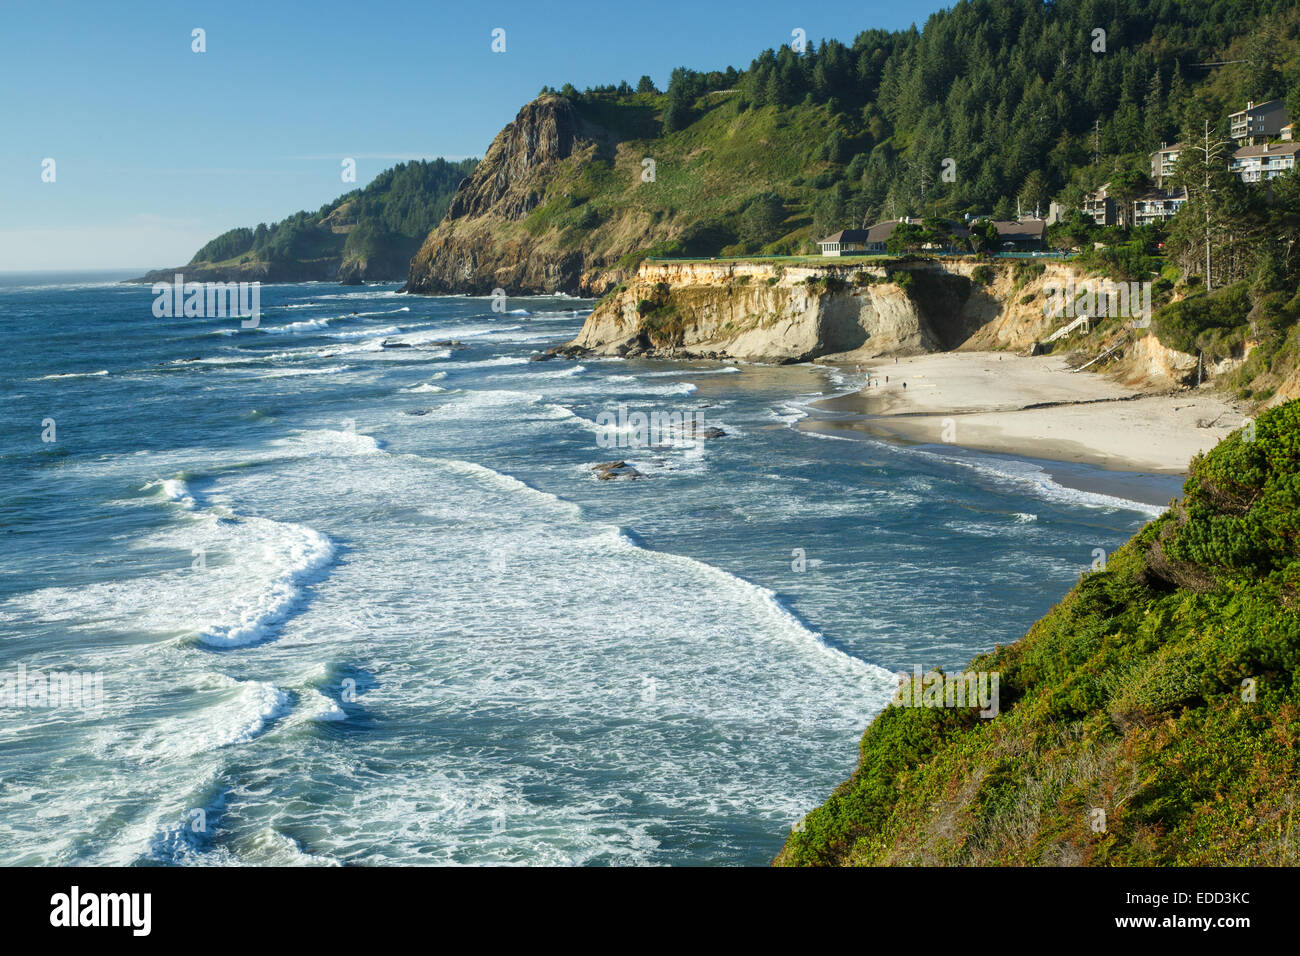 The coastal waters of the Pacific Ocean along the Oregon coast Stock Photo